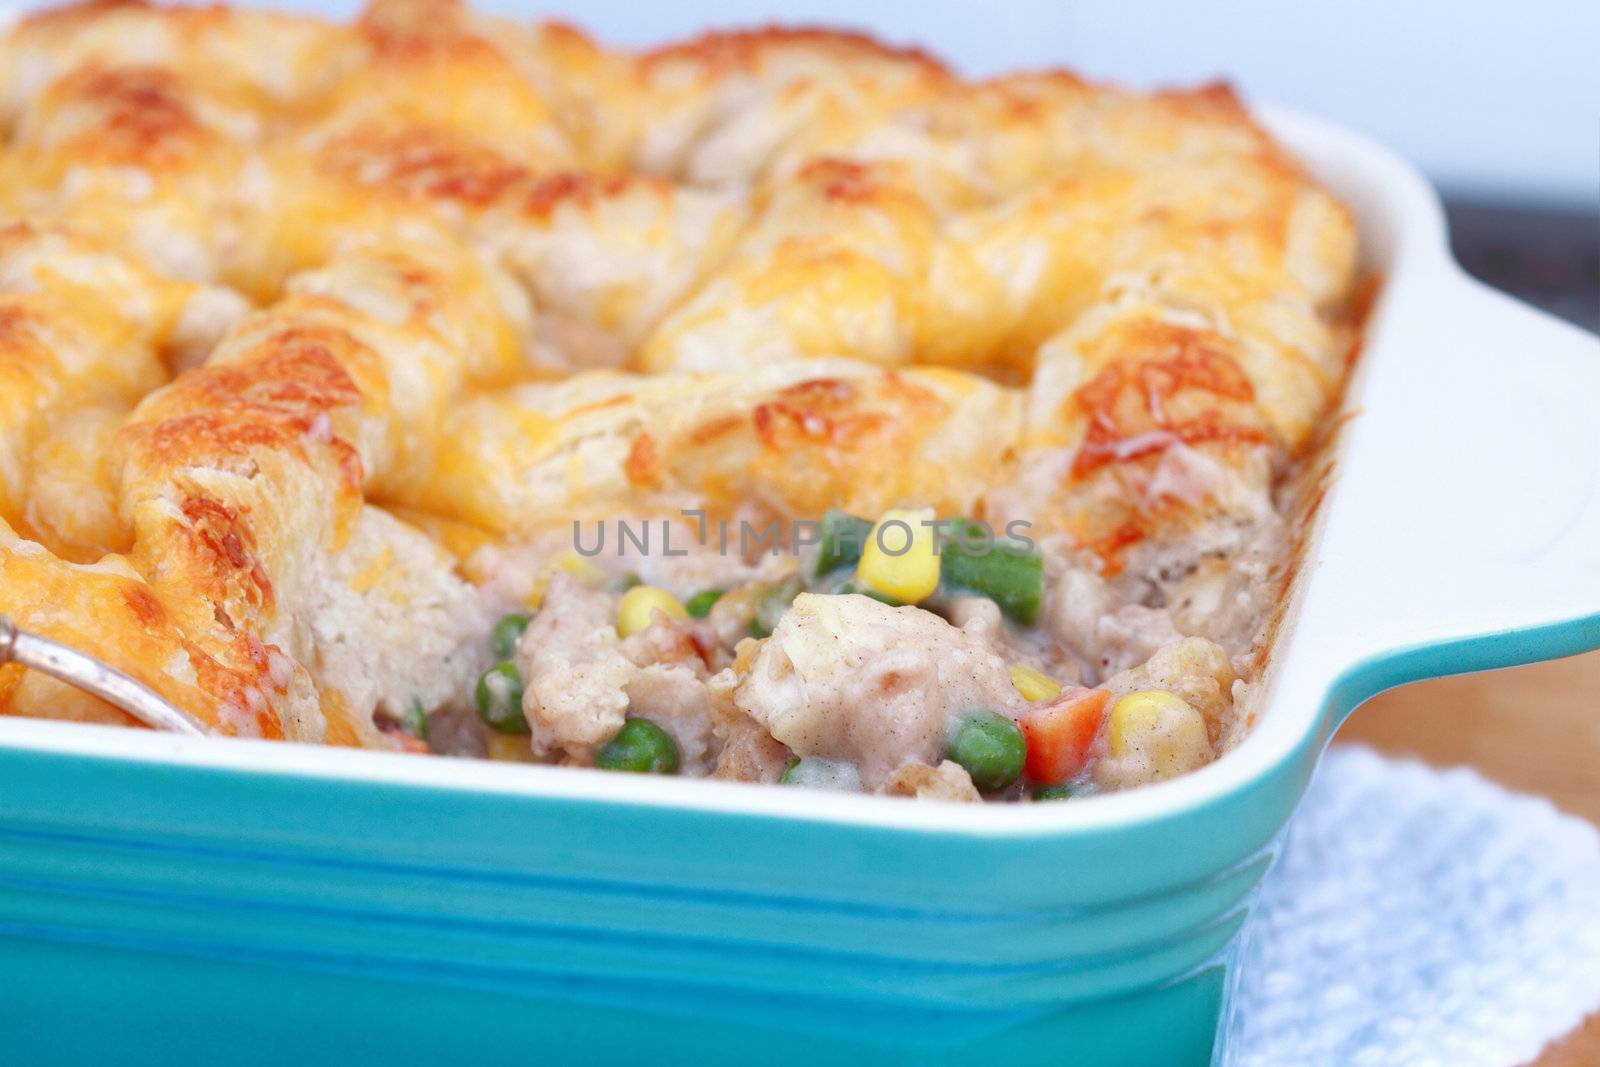 Chicken pot pie with ingredients showing. Shallow DOF.